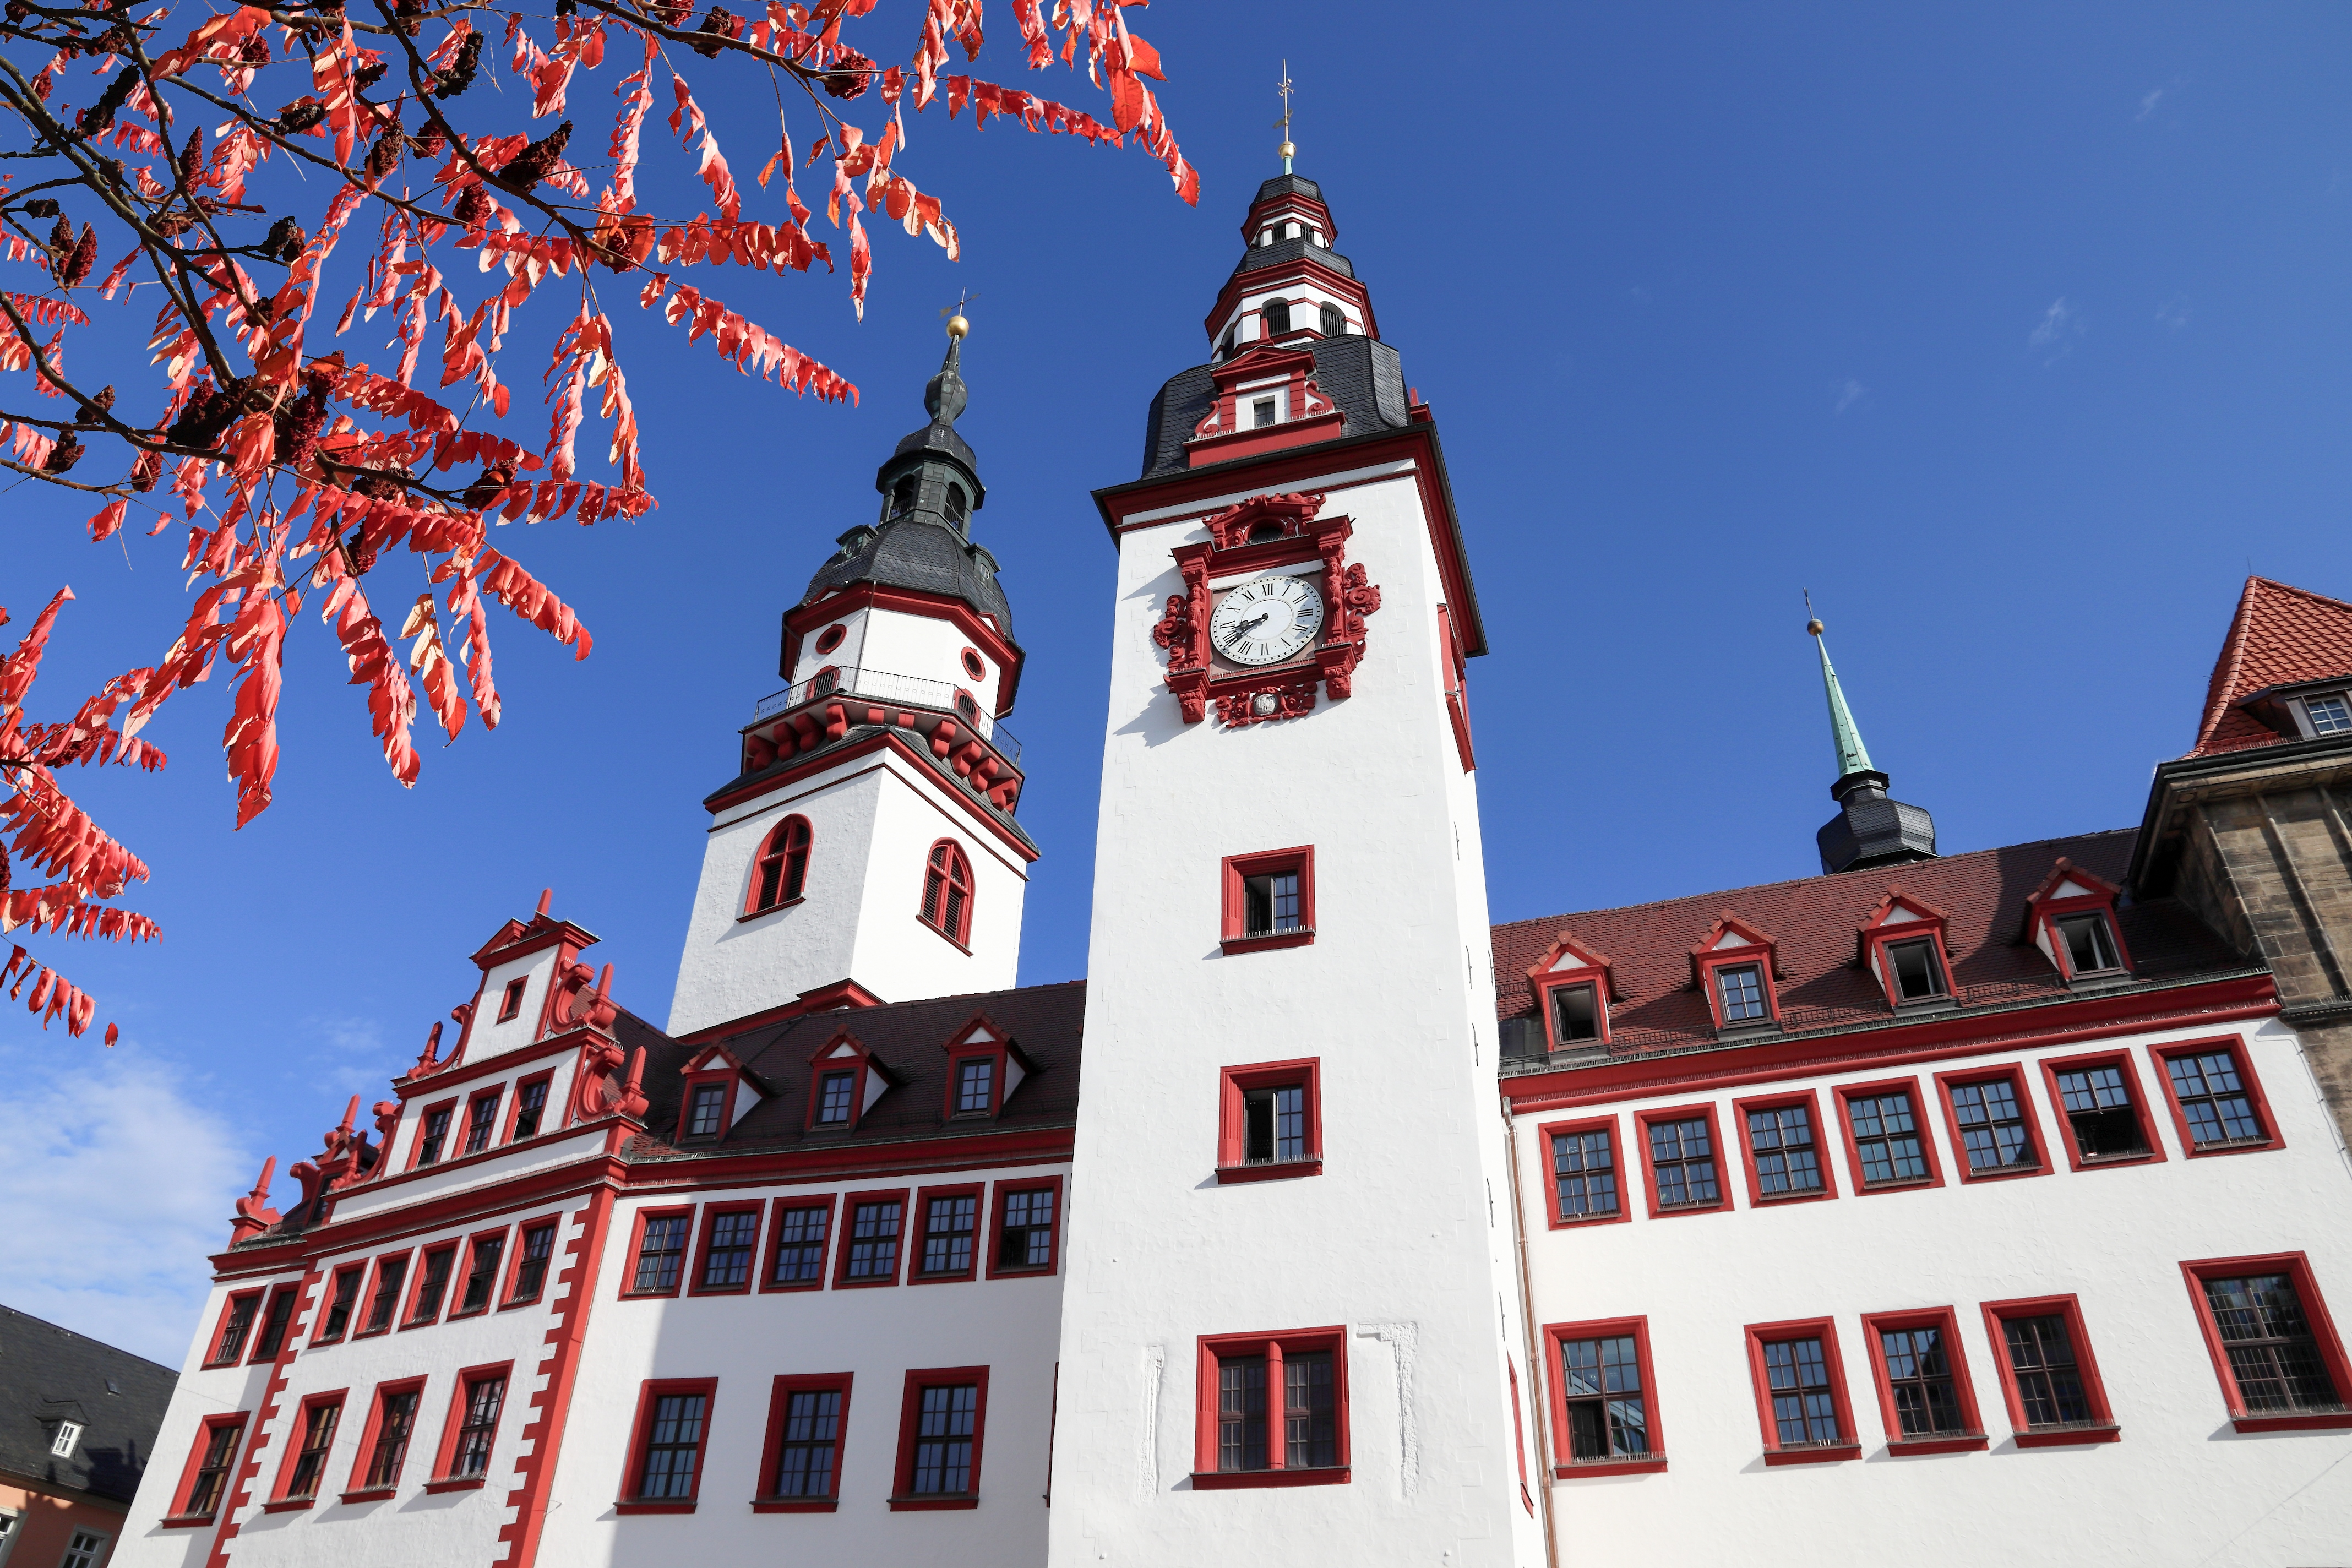 Take a walking tour in Chemnitz to see the Old Town Hall